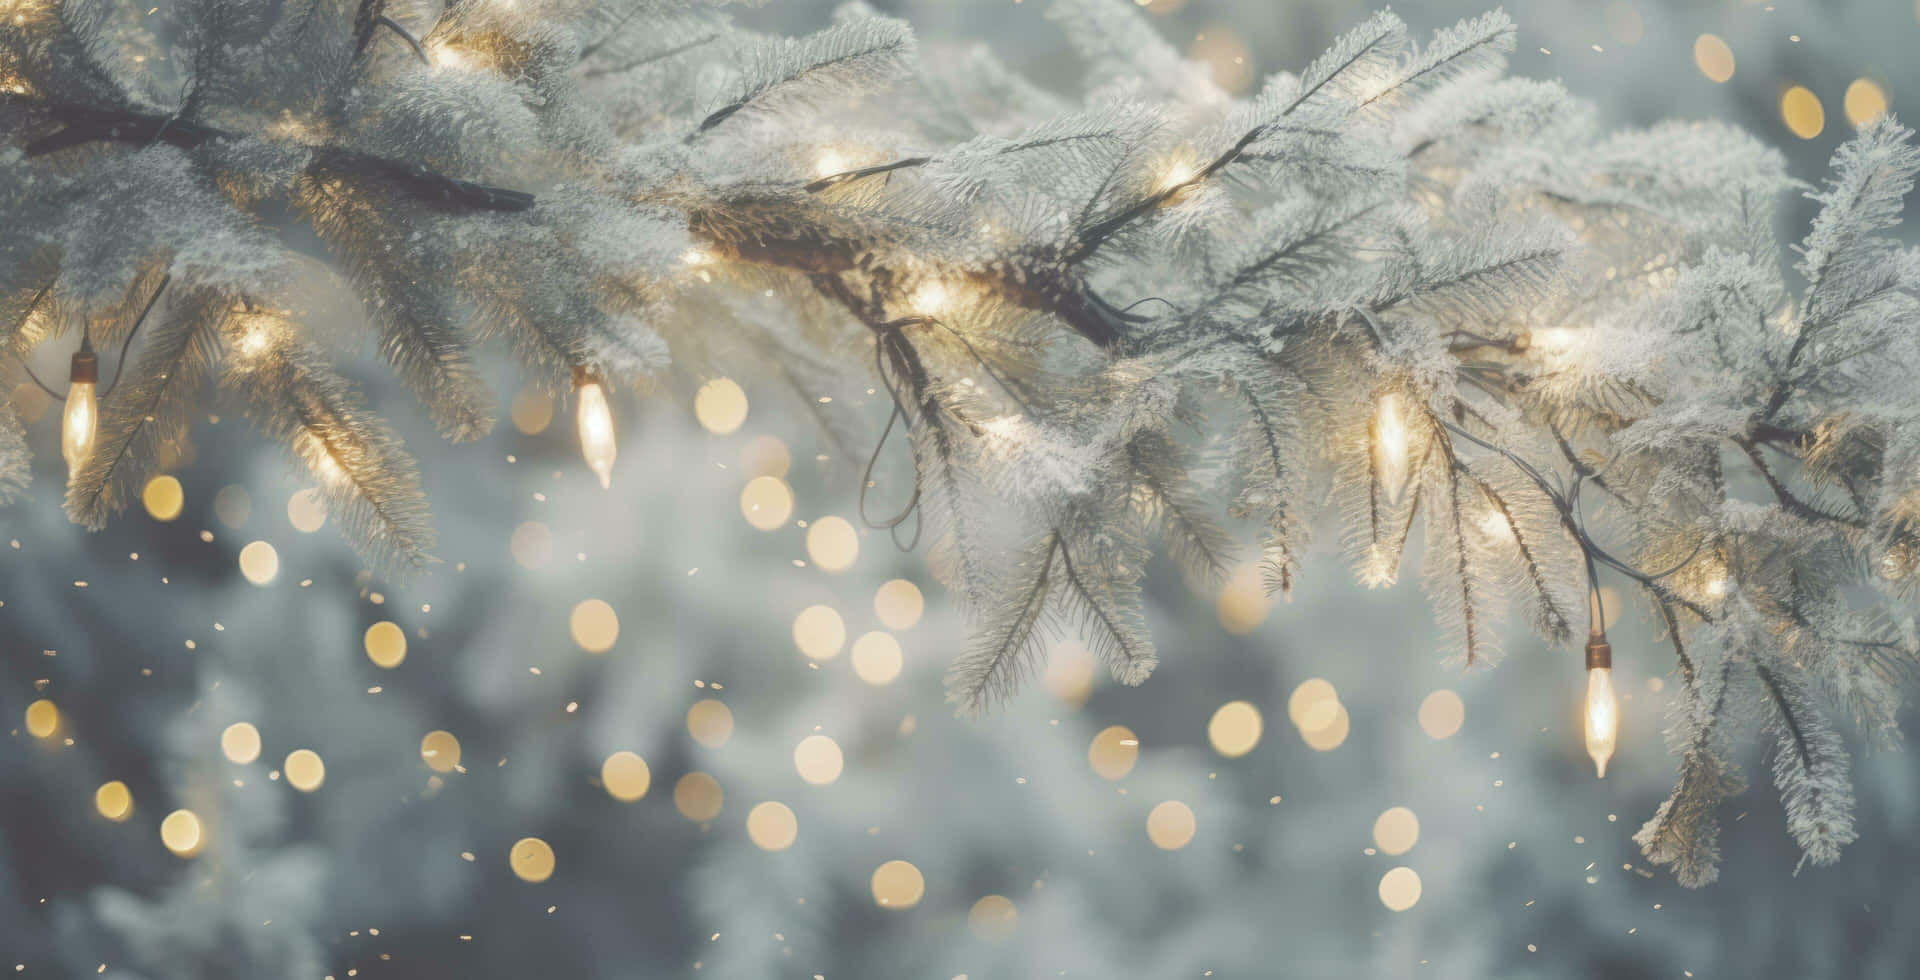 Frosted Pine Brancheswith Lights.jpg Wallpaper